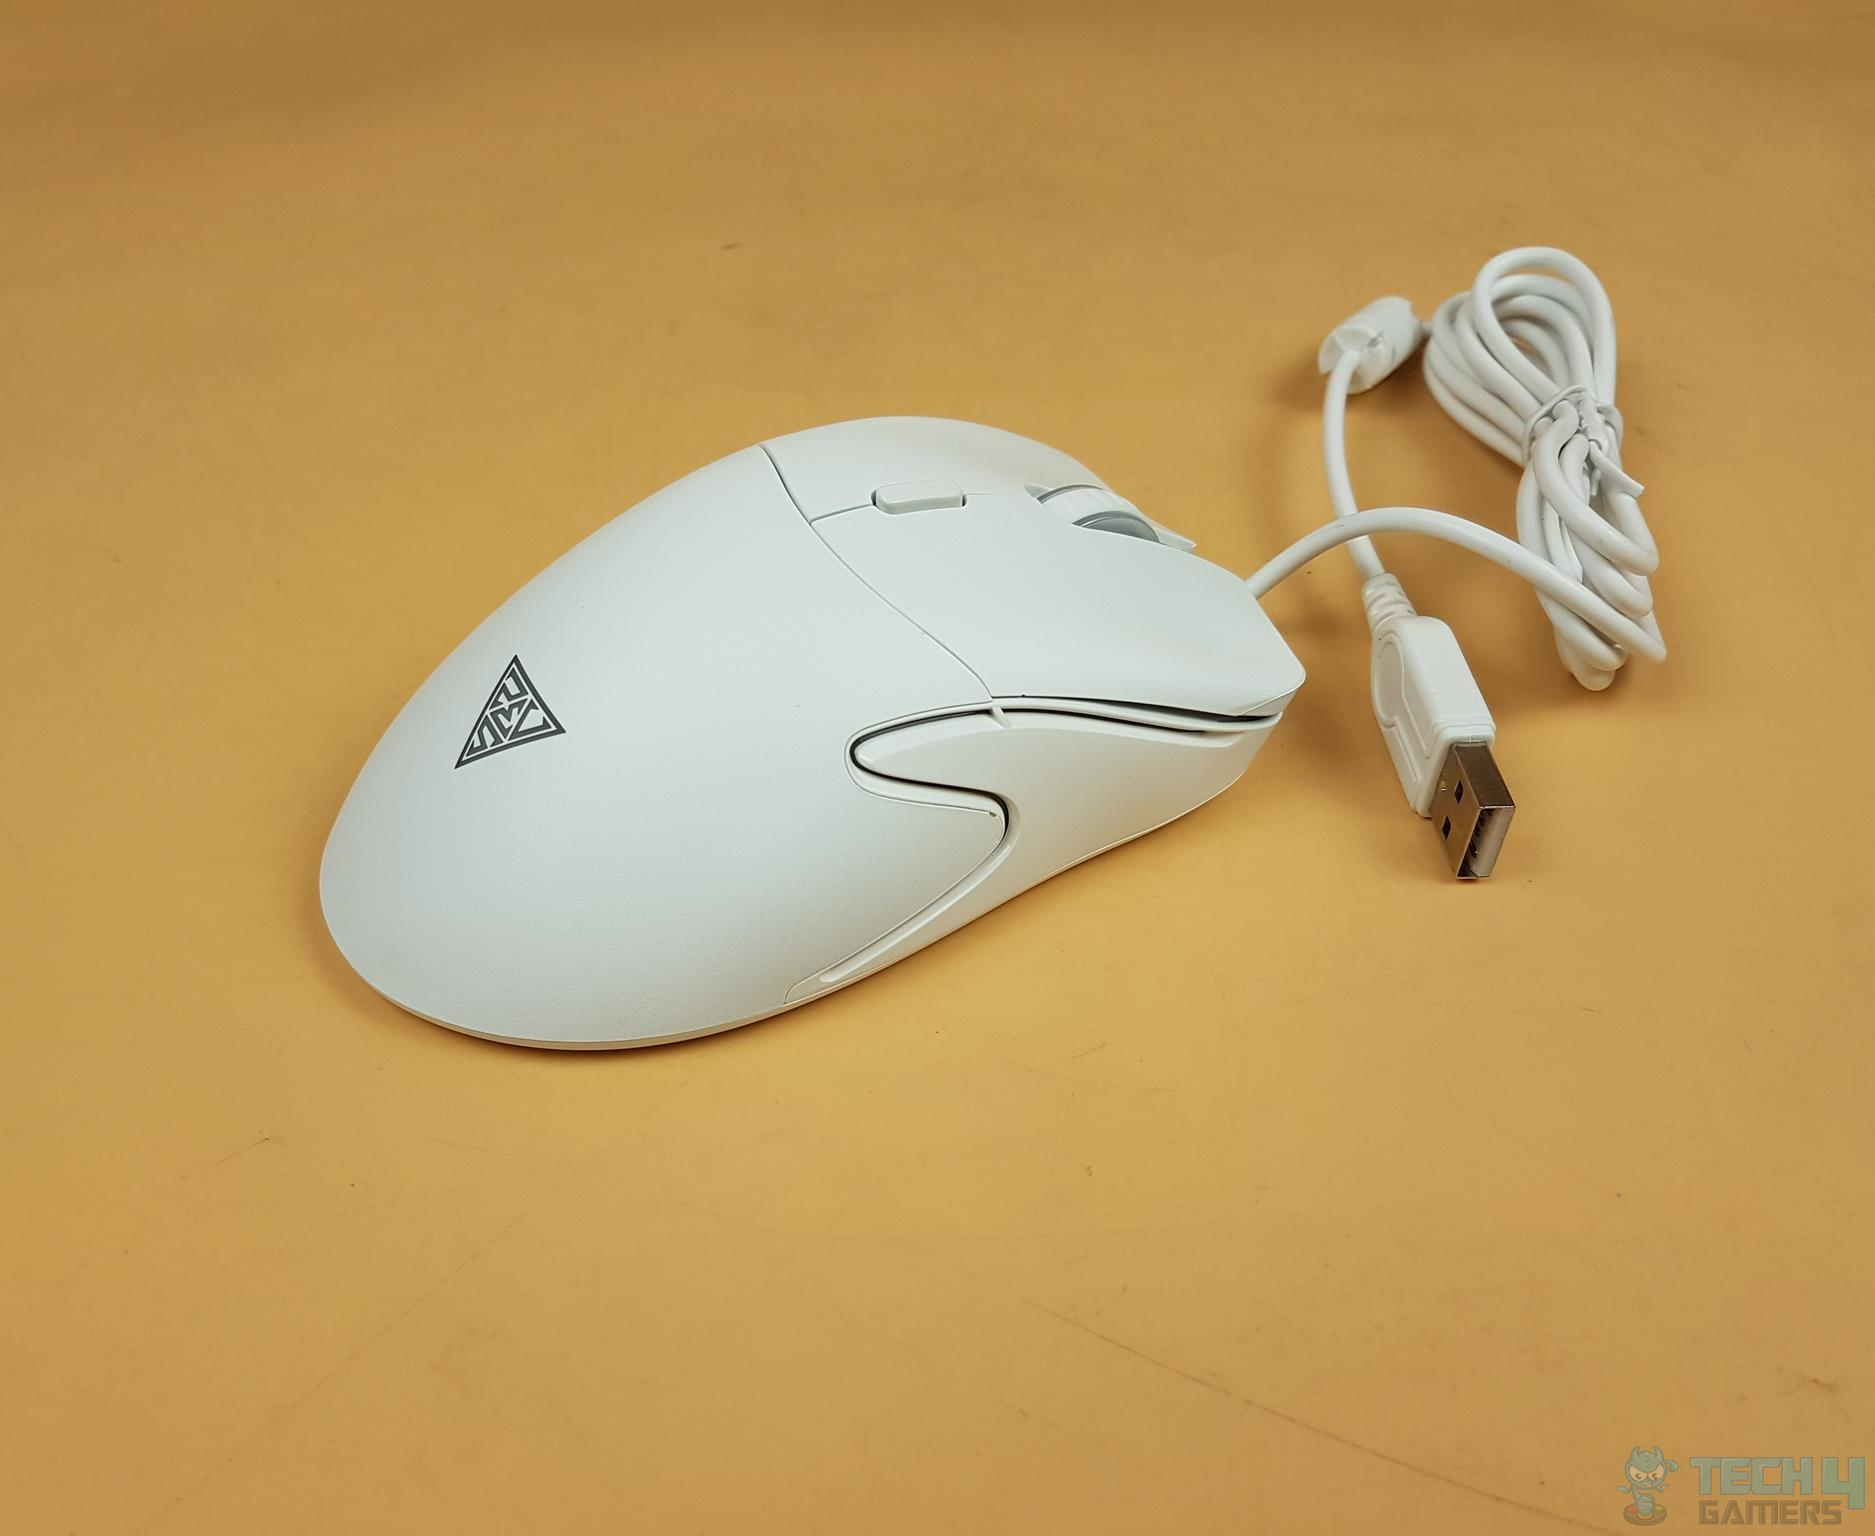 Displaying the GAMDIAS Mouse’s side-exterior.